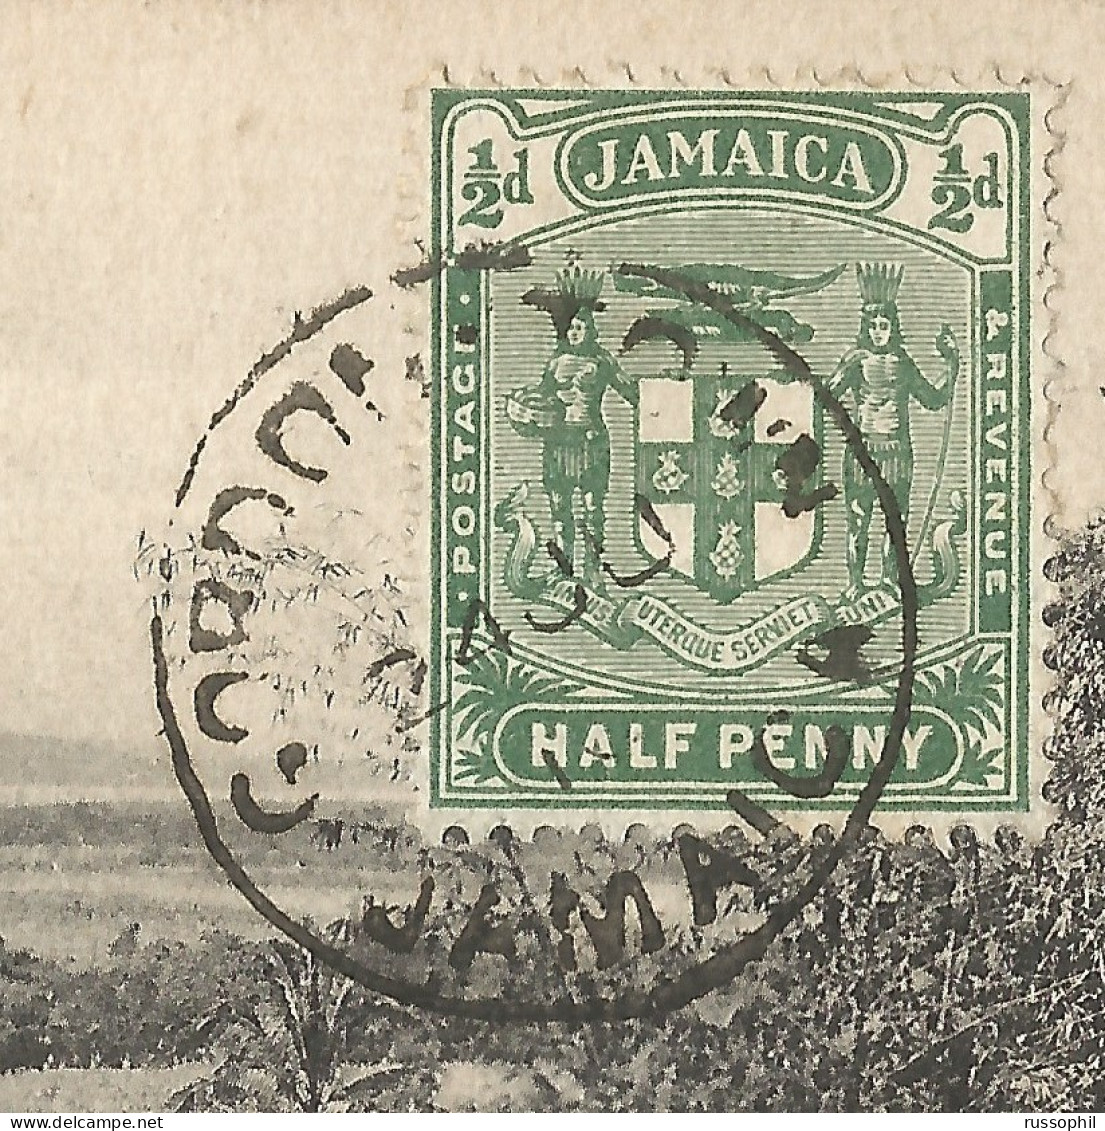 JAMAICA -  "GORDON TOWN" CDS ON FRANKED PC (VIEW OF CANE FIELDS) FROM KINGSTON TO BELGIUM - 1910 - Jamaica (...-1961)